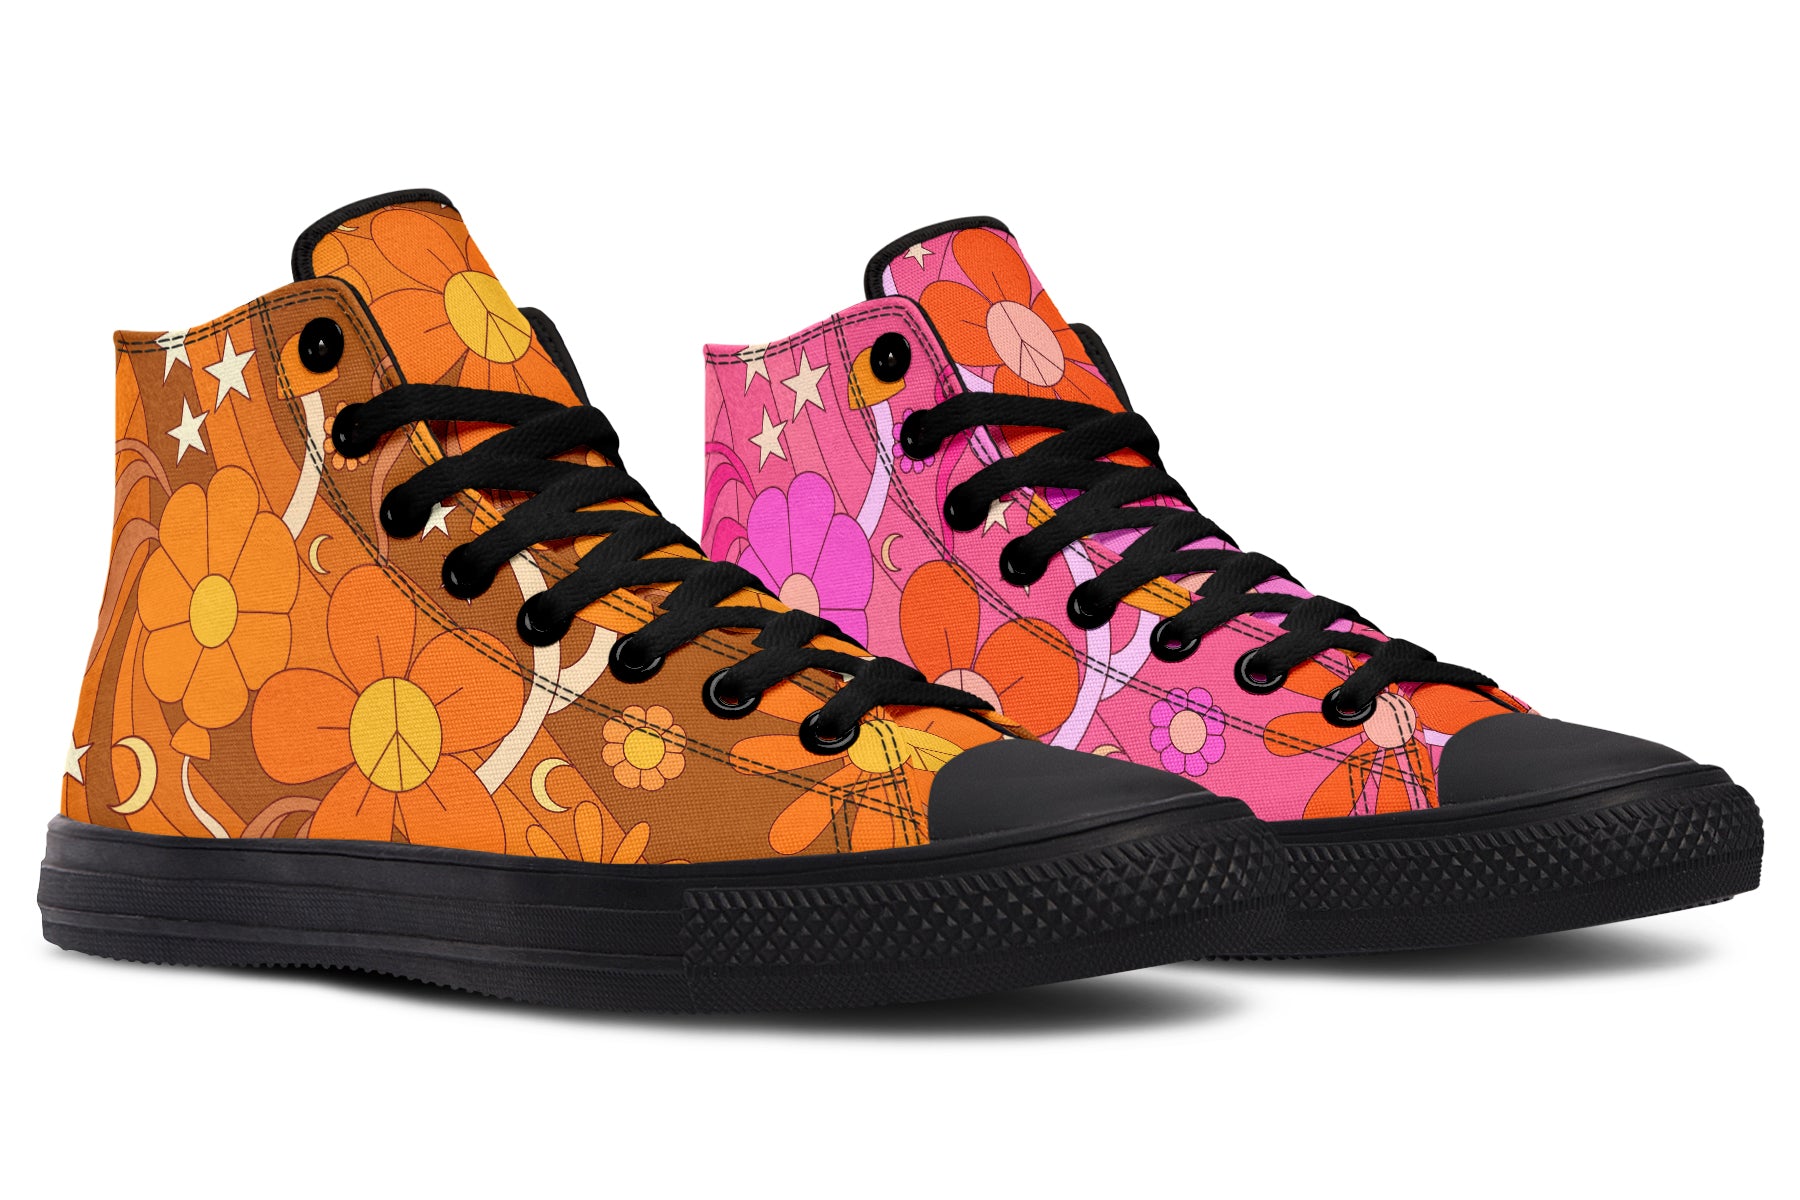 Molly's Mismatched Retro Daisies High Tops